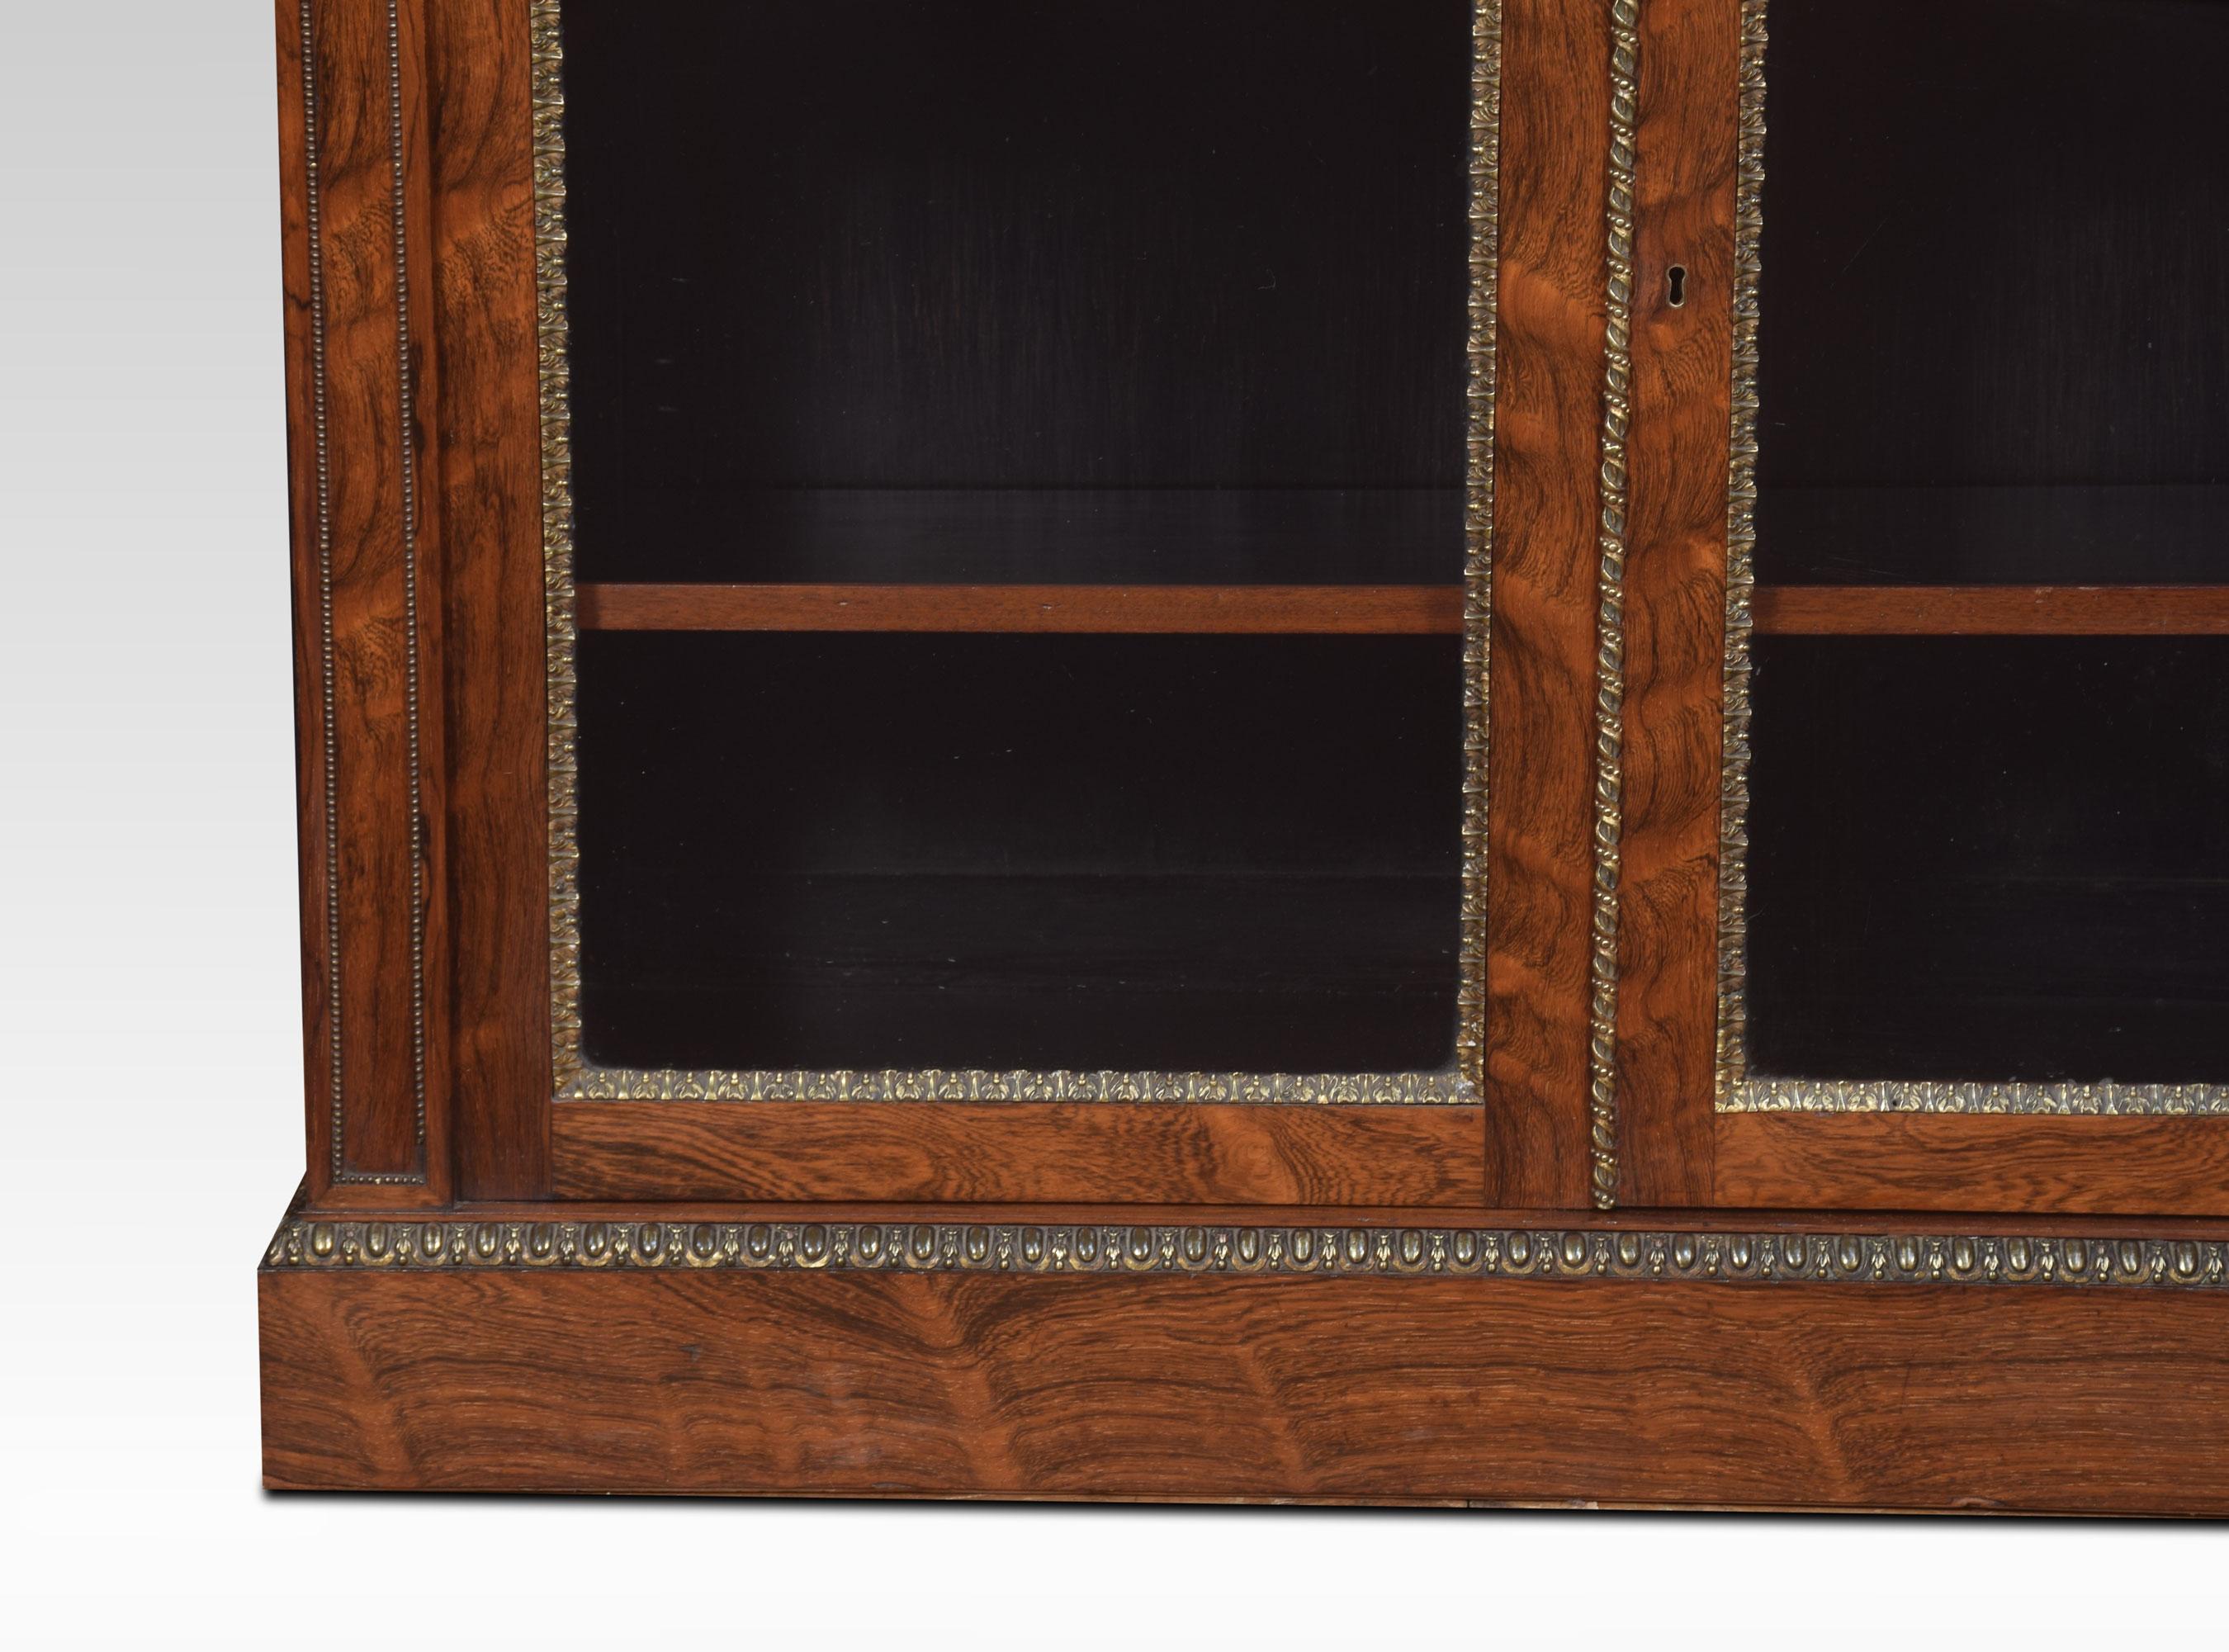 Two-door bookcase by Holland and Sons. The well-figured top having brass mounts. Above a pair of glazed doors opening to reveal an adjustable shelved interior. Flanked by molded columns with brass border. All raised up on plinth